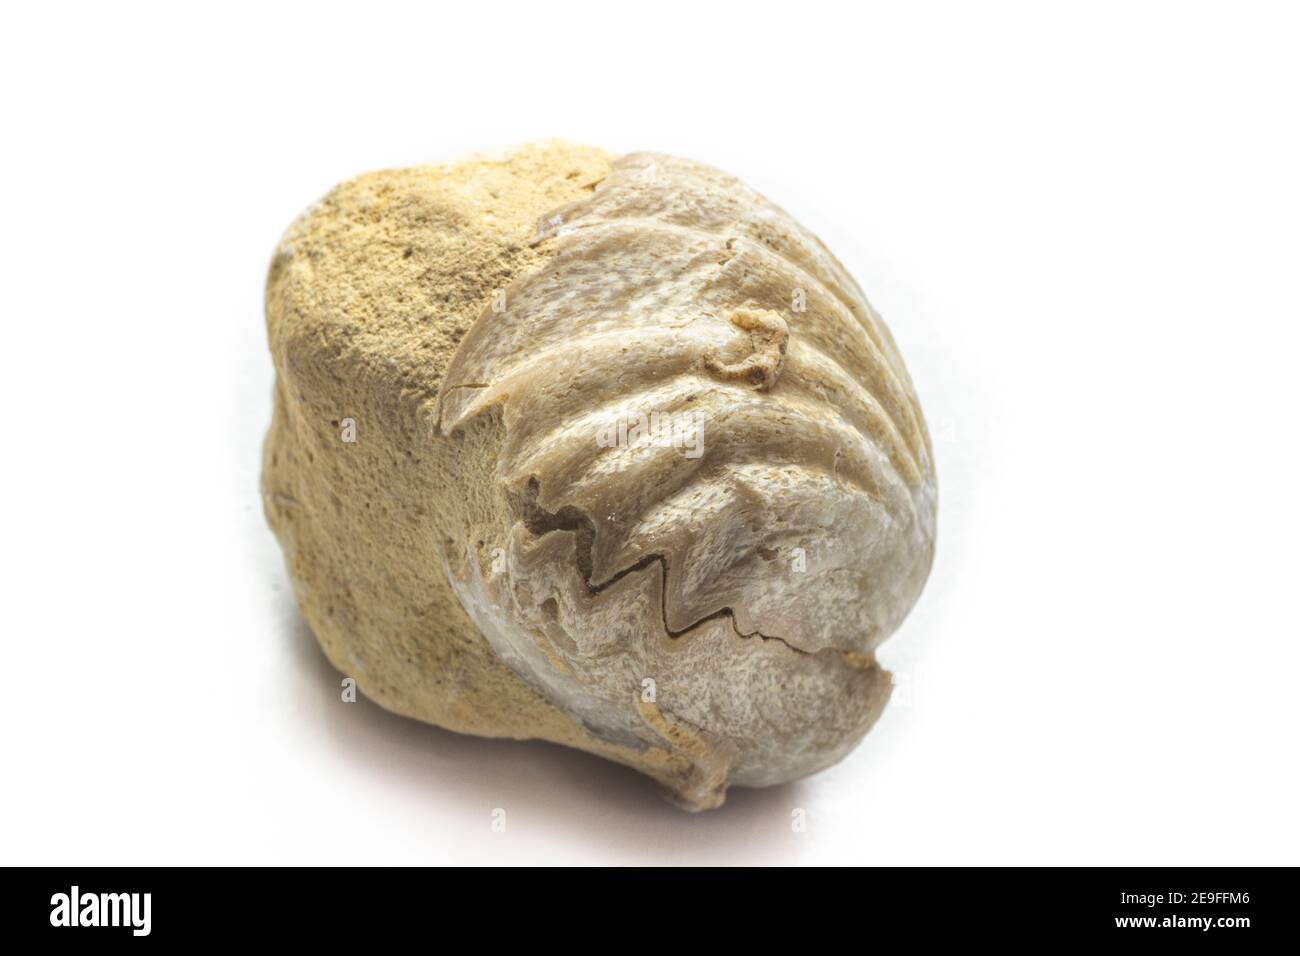 Fossil on a white background of Ostree bivalve, Neithea or Pecten, found on the slopes of the Maiella. Stock Photo